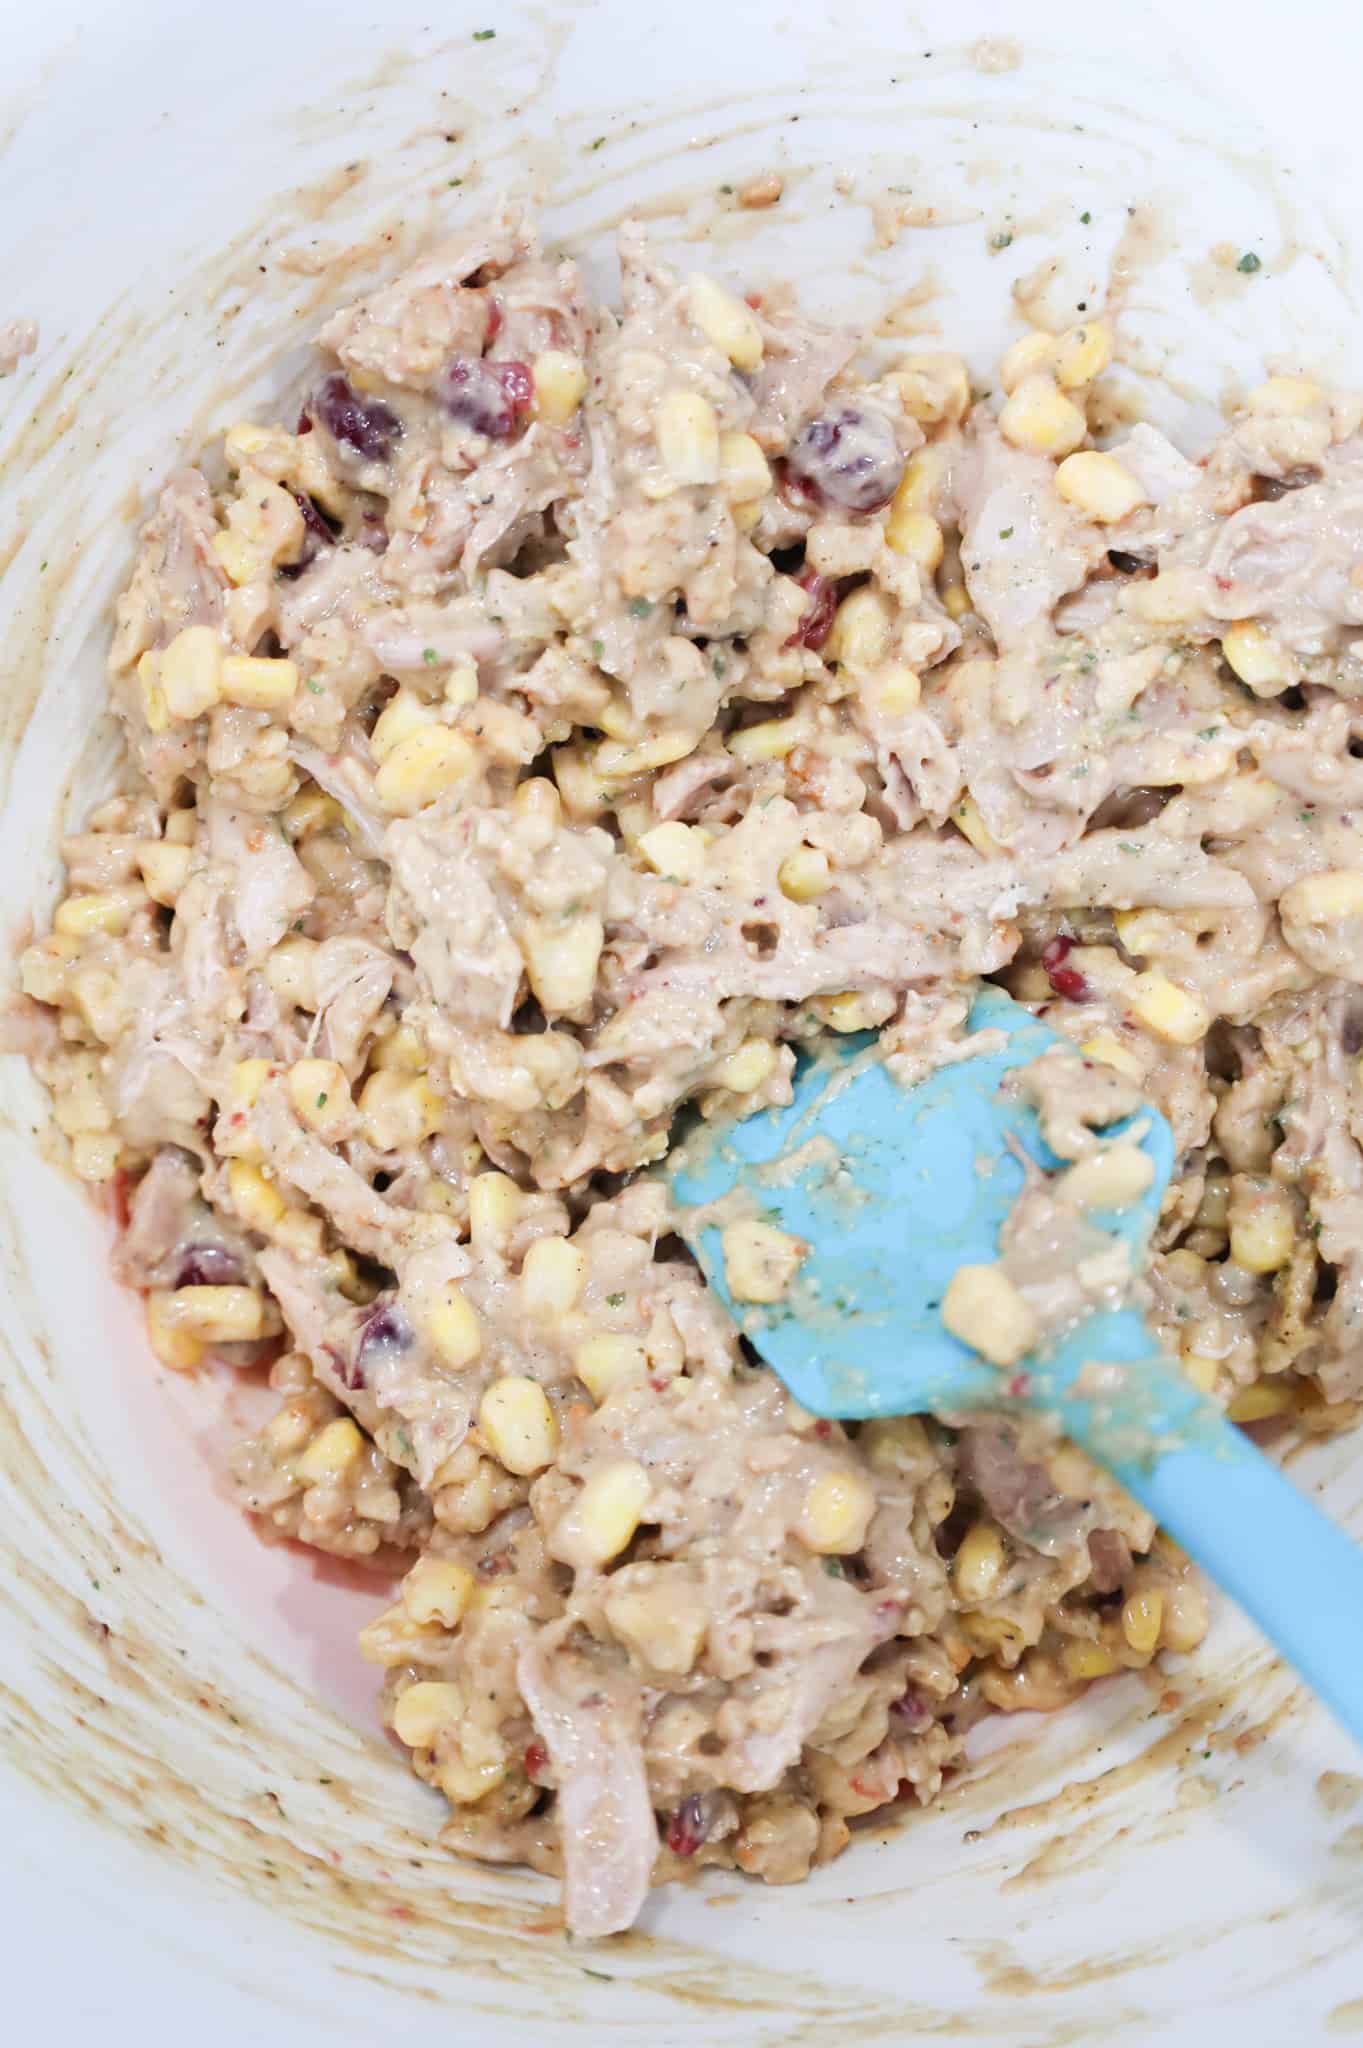 shredded turkey, corn, cranberries, stuffing mix and cream of chicken soup stirred together in a mixing bowl